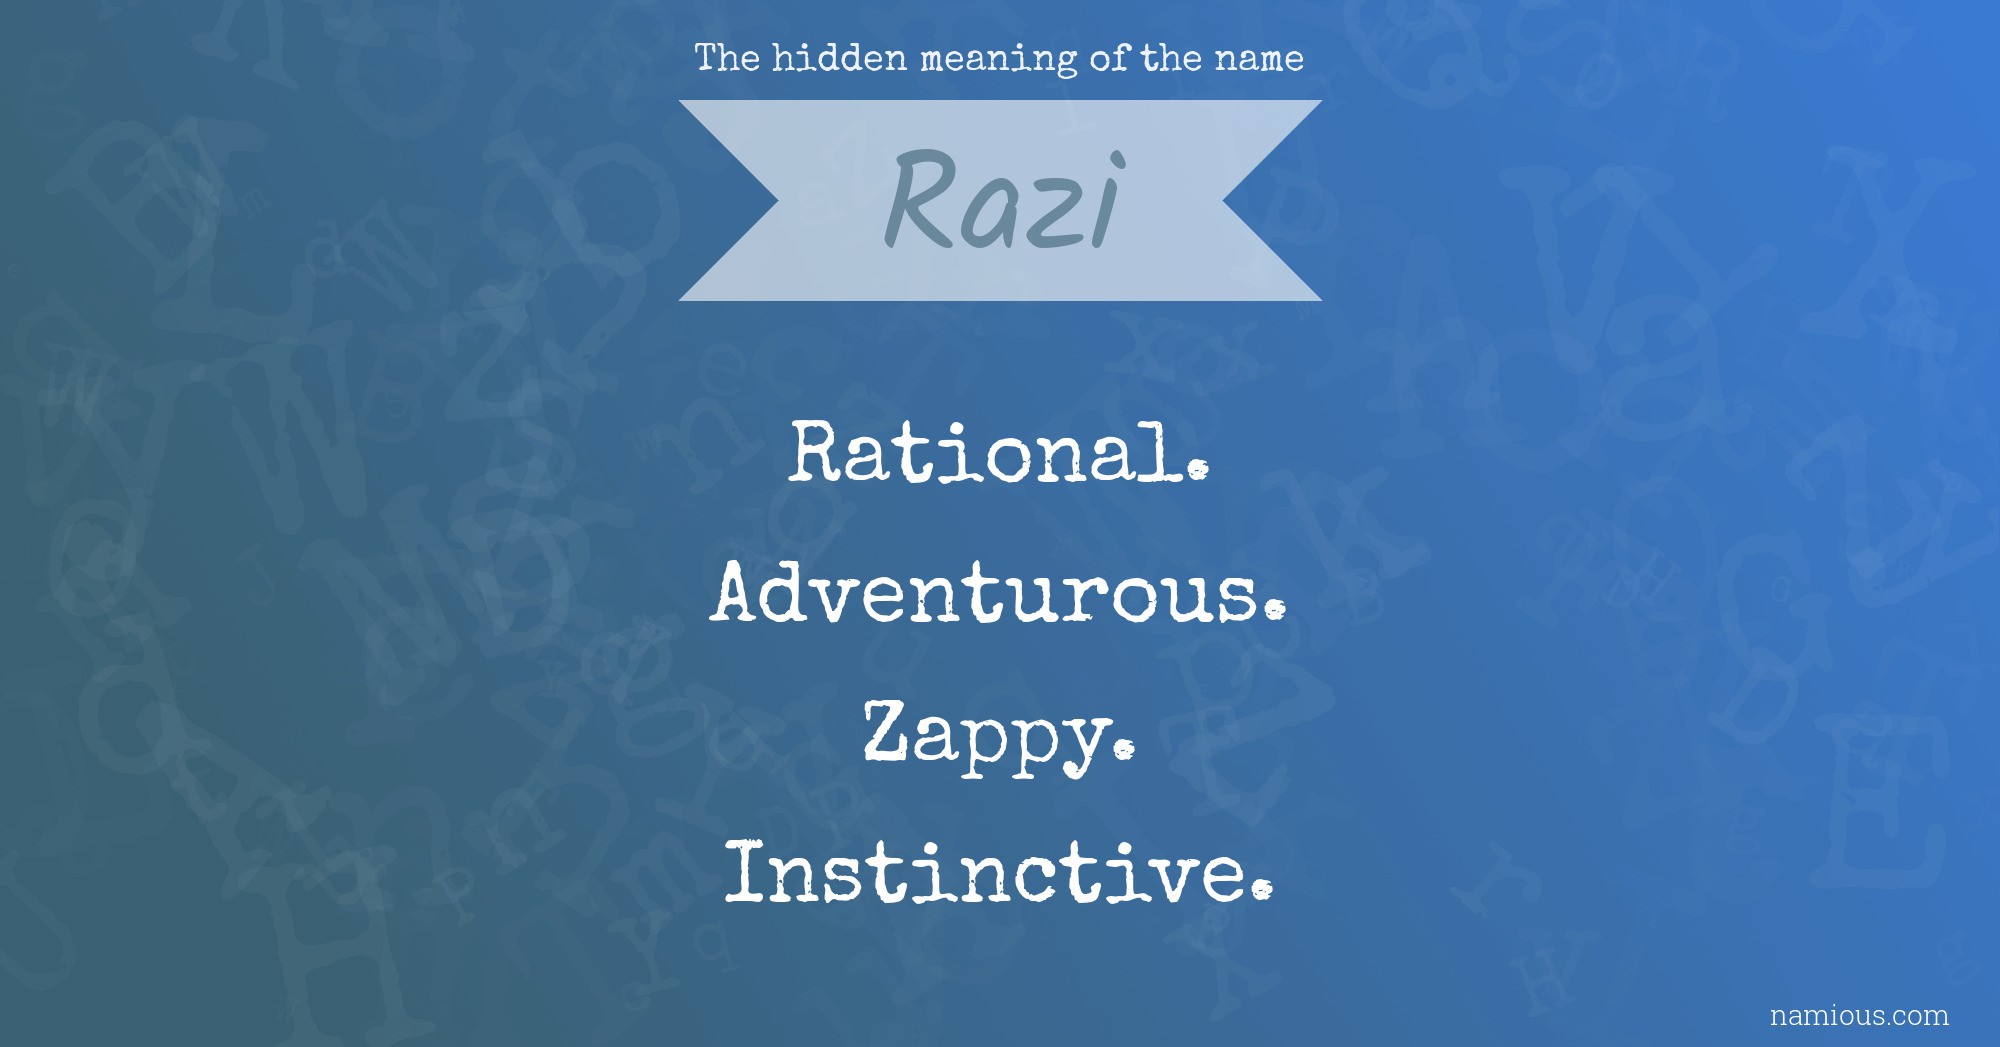 The hidden meaning of the name Razi